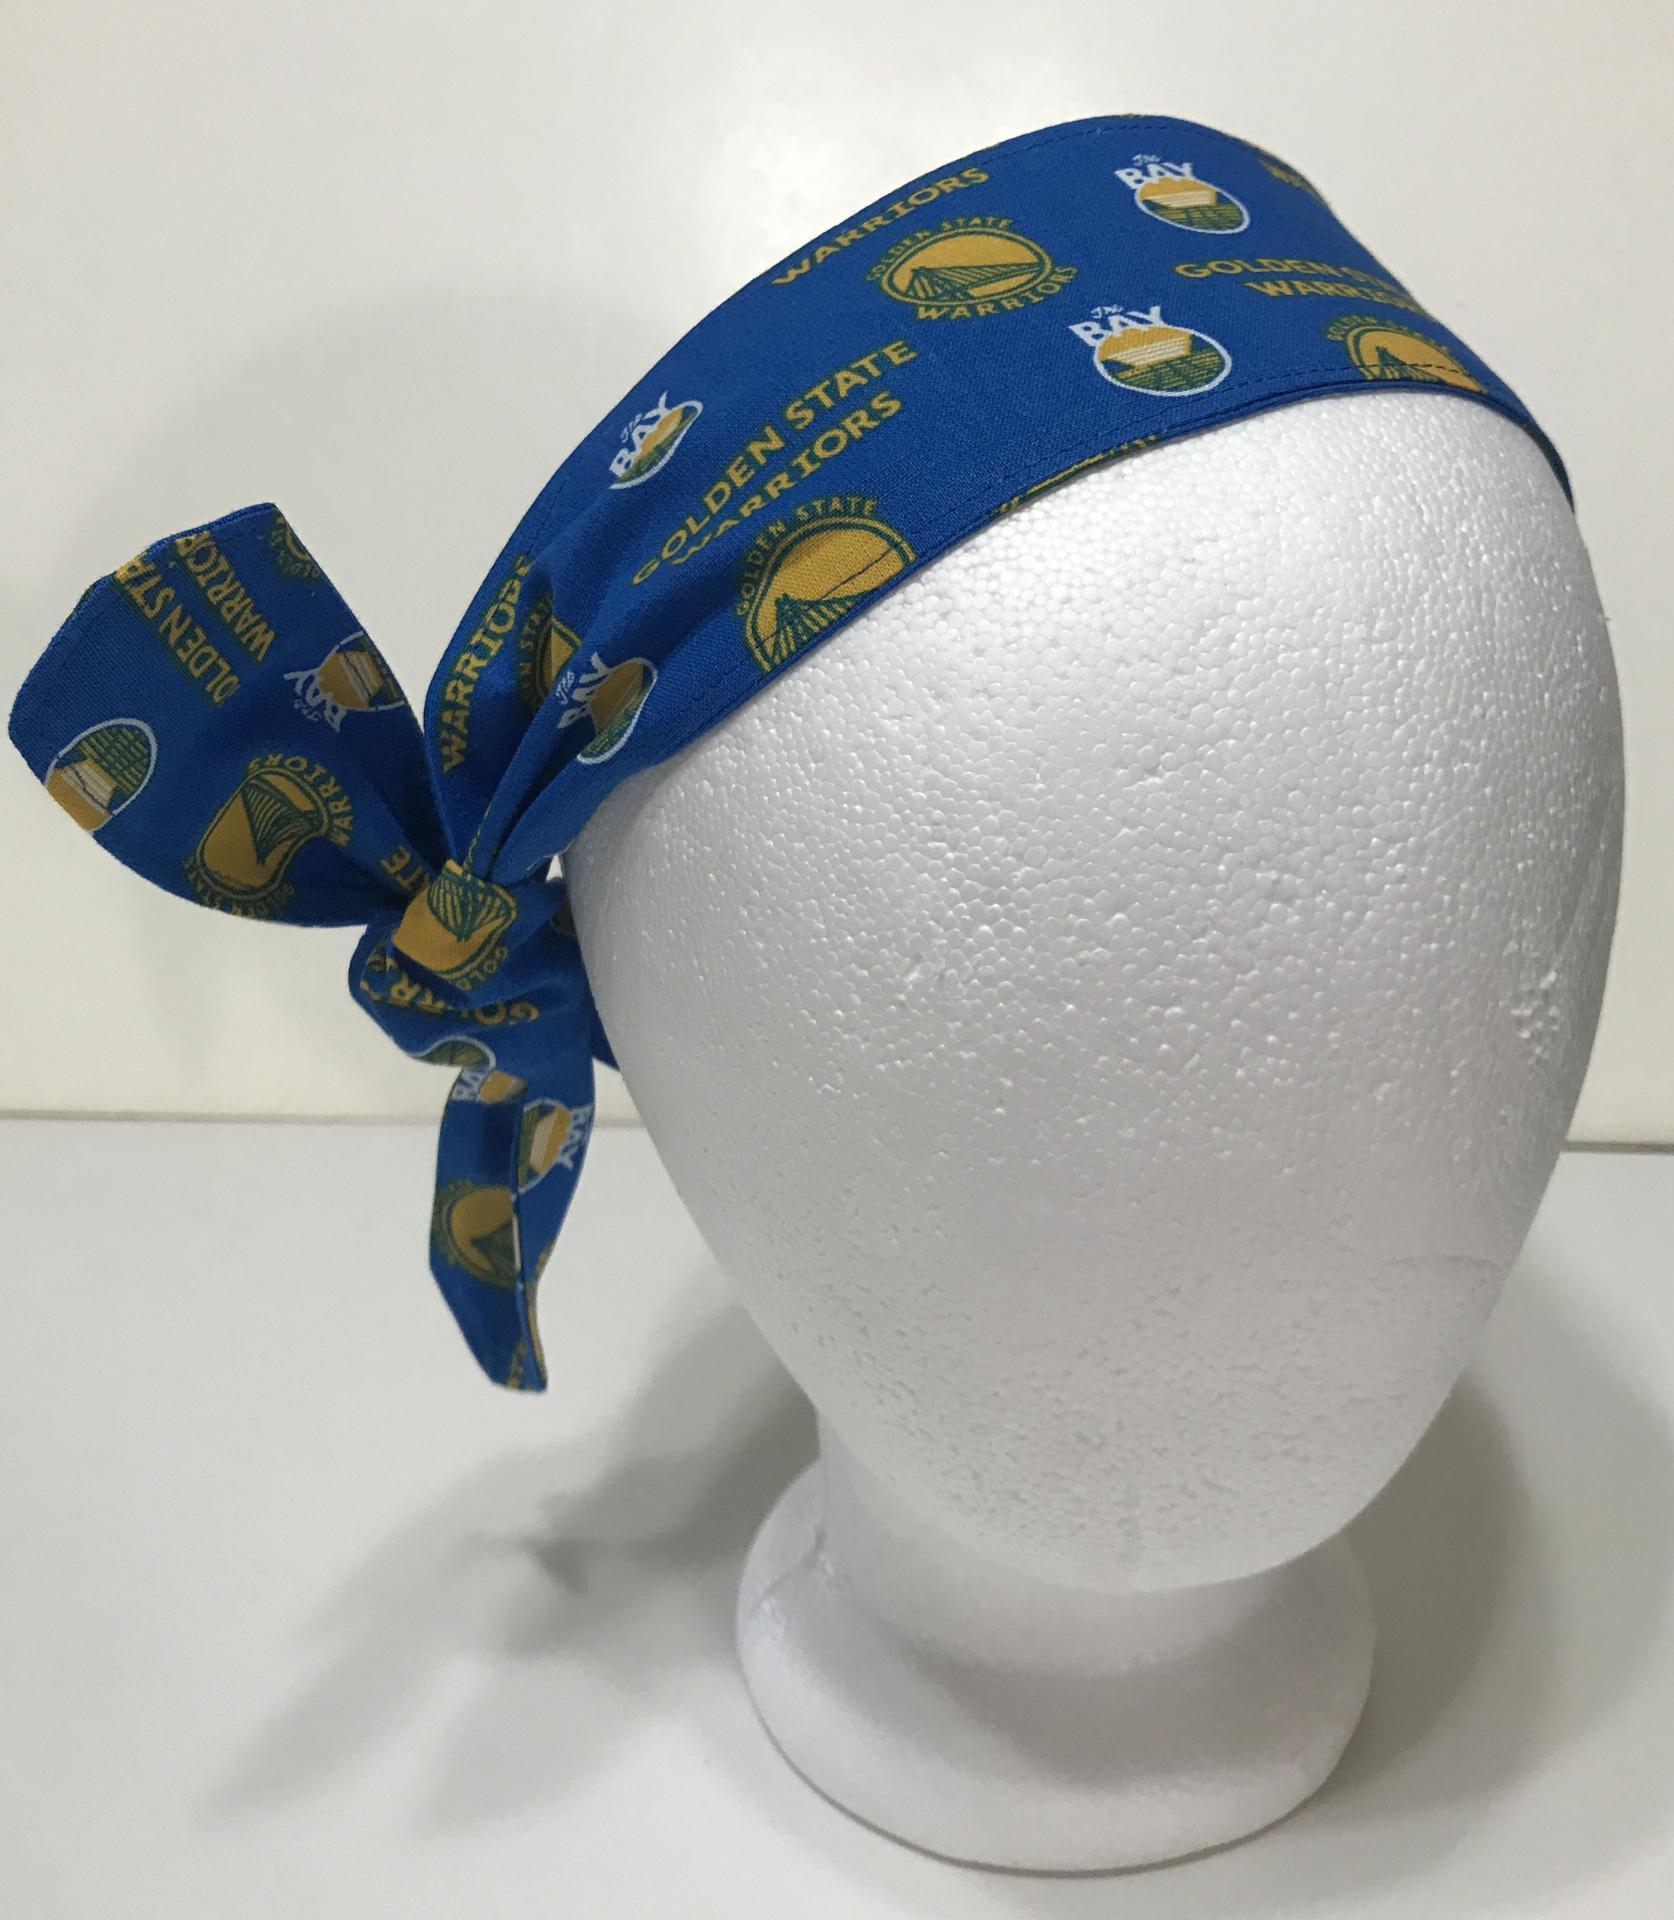 GSW hair wrap scarf shown on mannequin, with knot tied on side